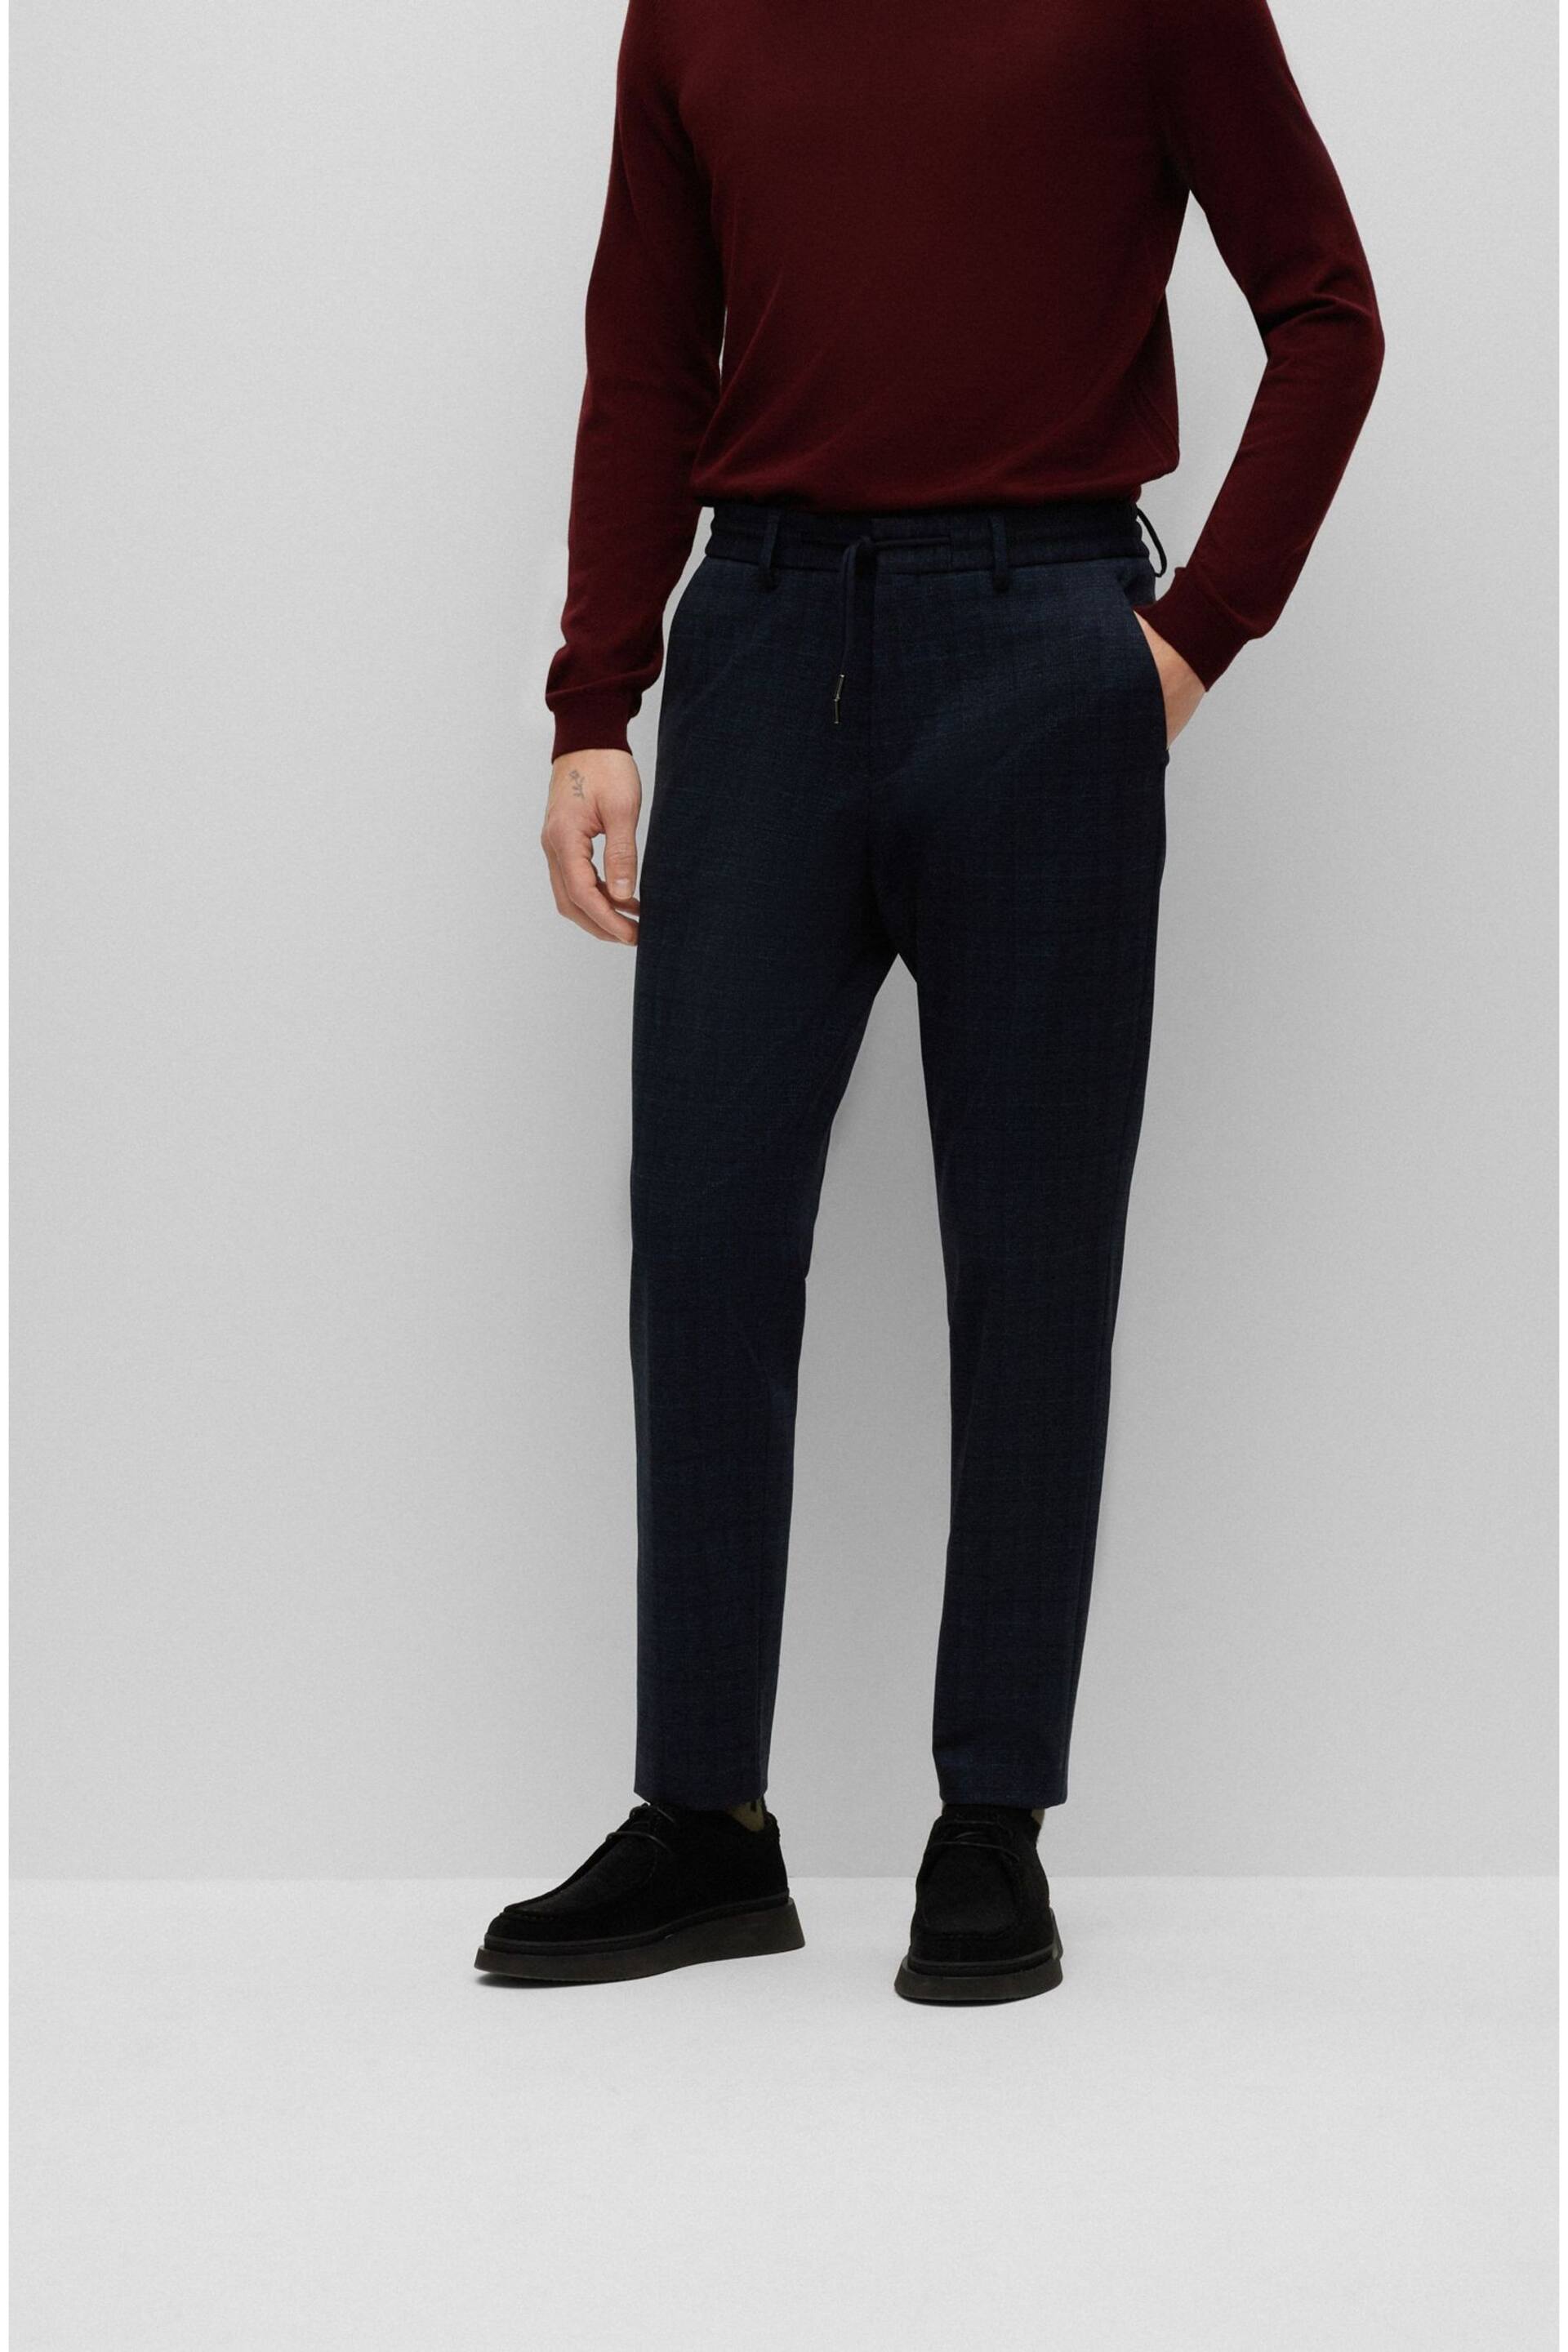 BOSS Dark Blue Tapered Fit Contempory Check Trousers - Image 1 of 10